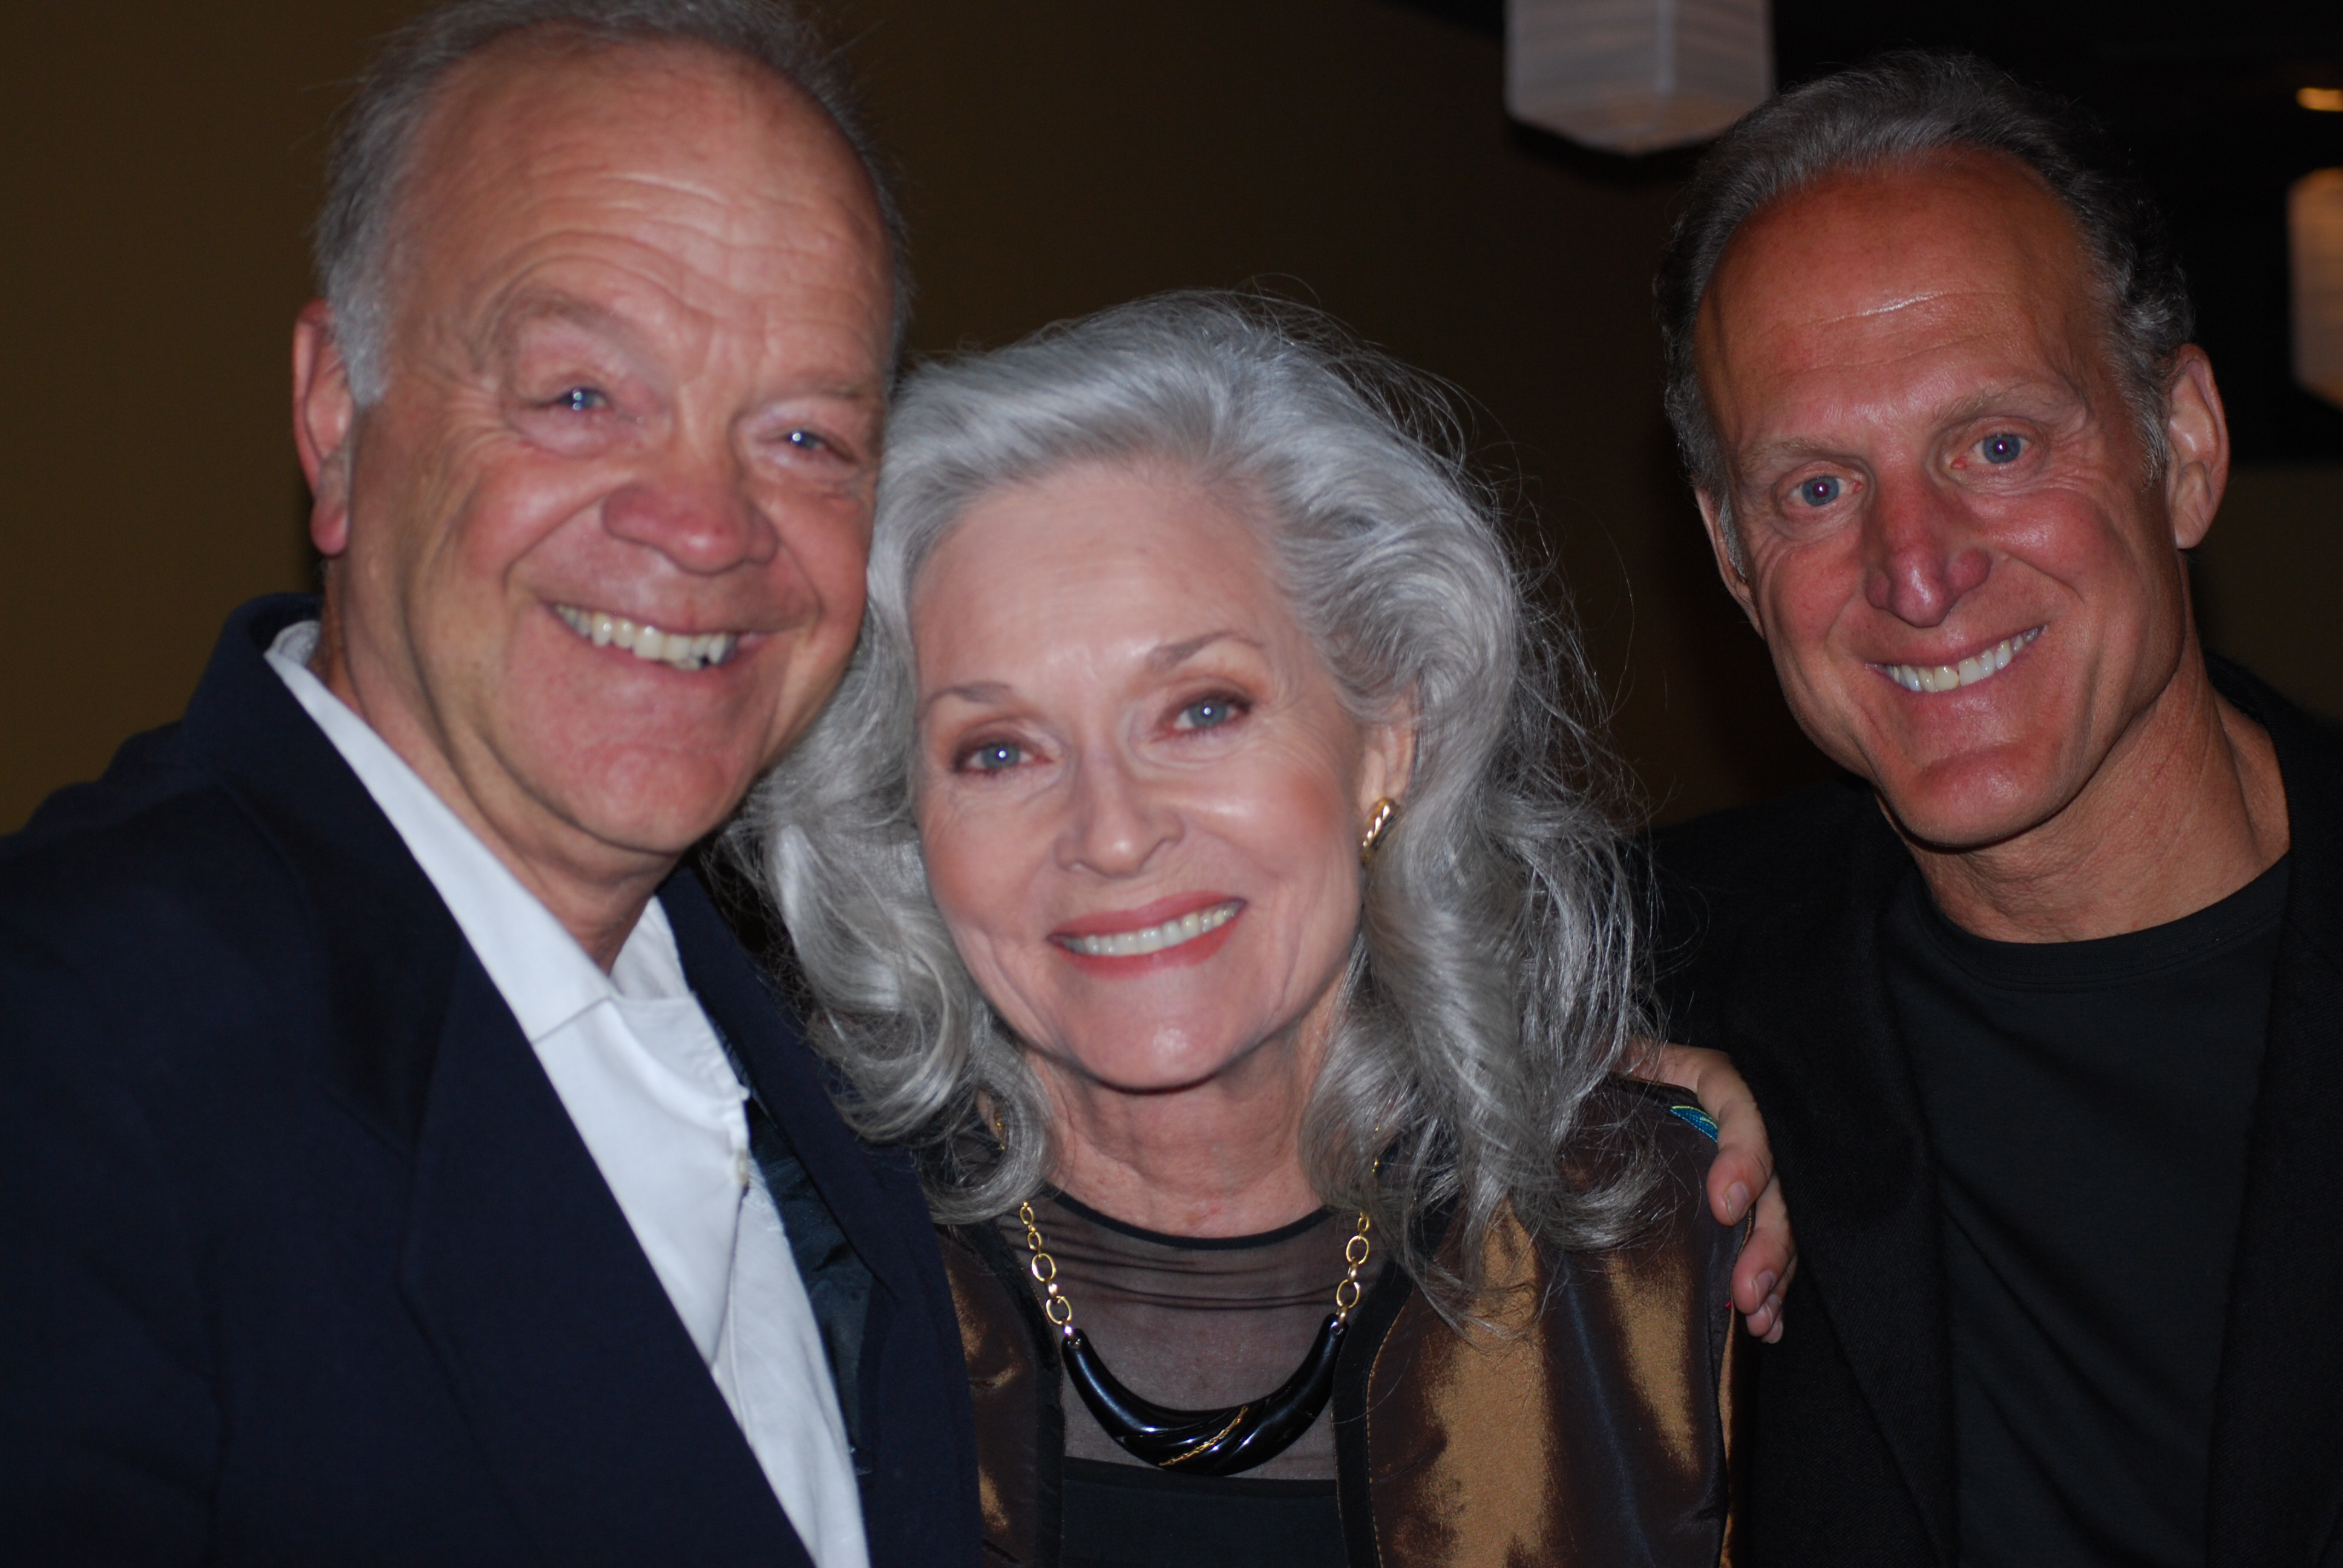 With Lee Meriwether at 